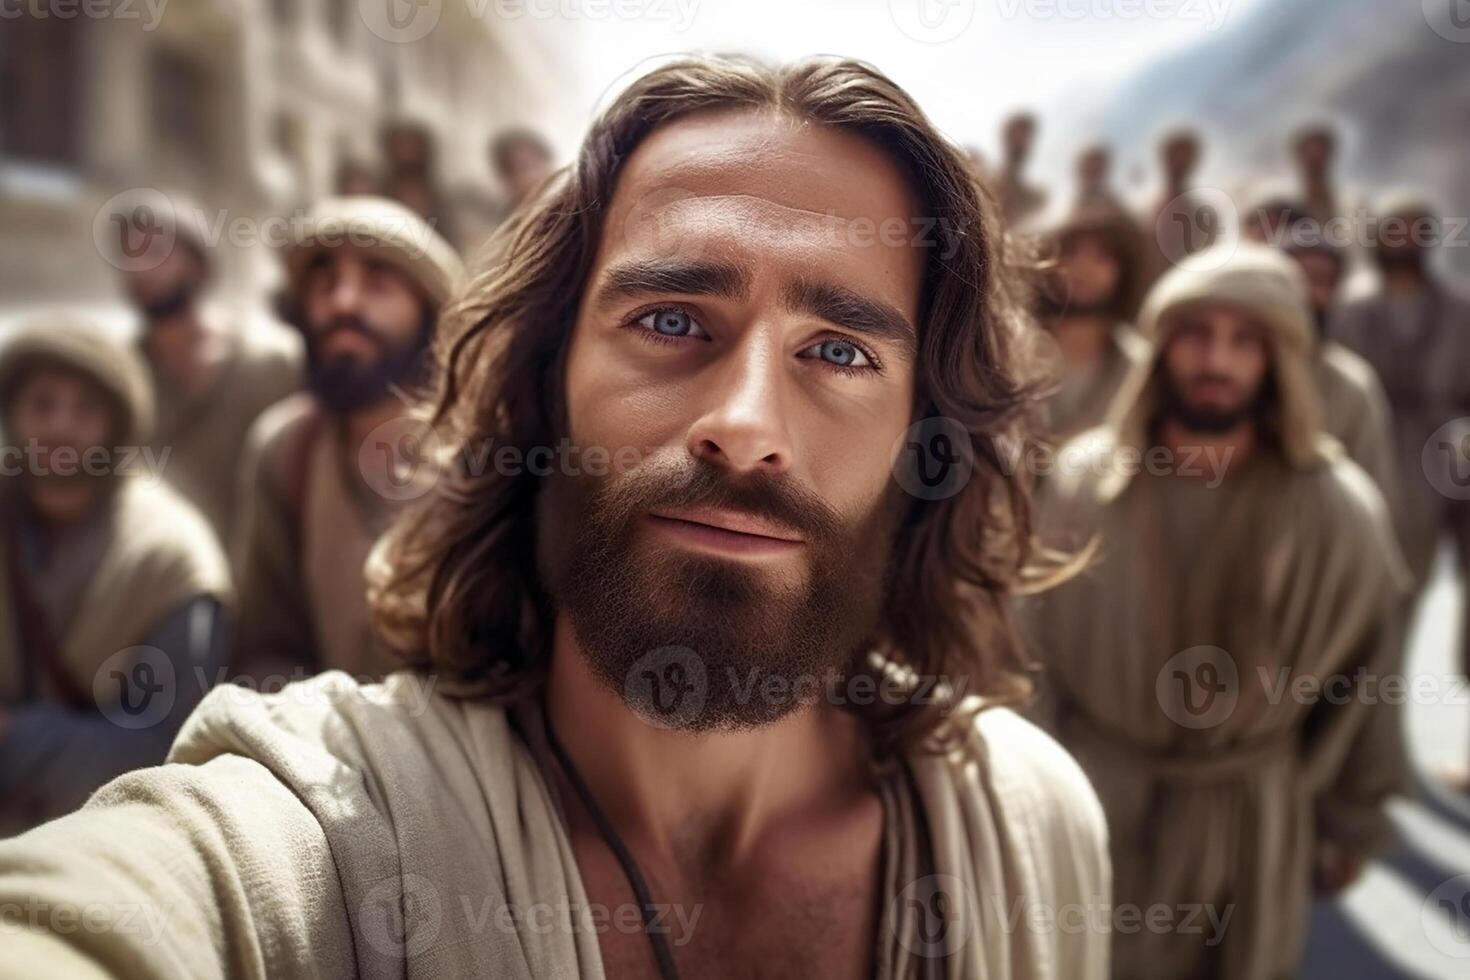 Jesus takes selfies. Portrait of a man who looks like Christ taking pictures of himself and his friends. photo